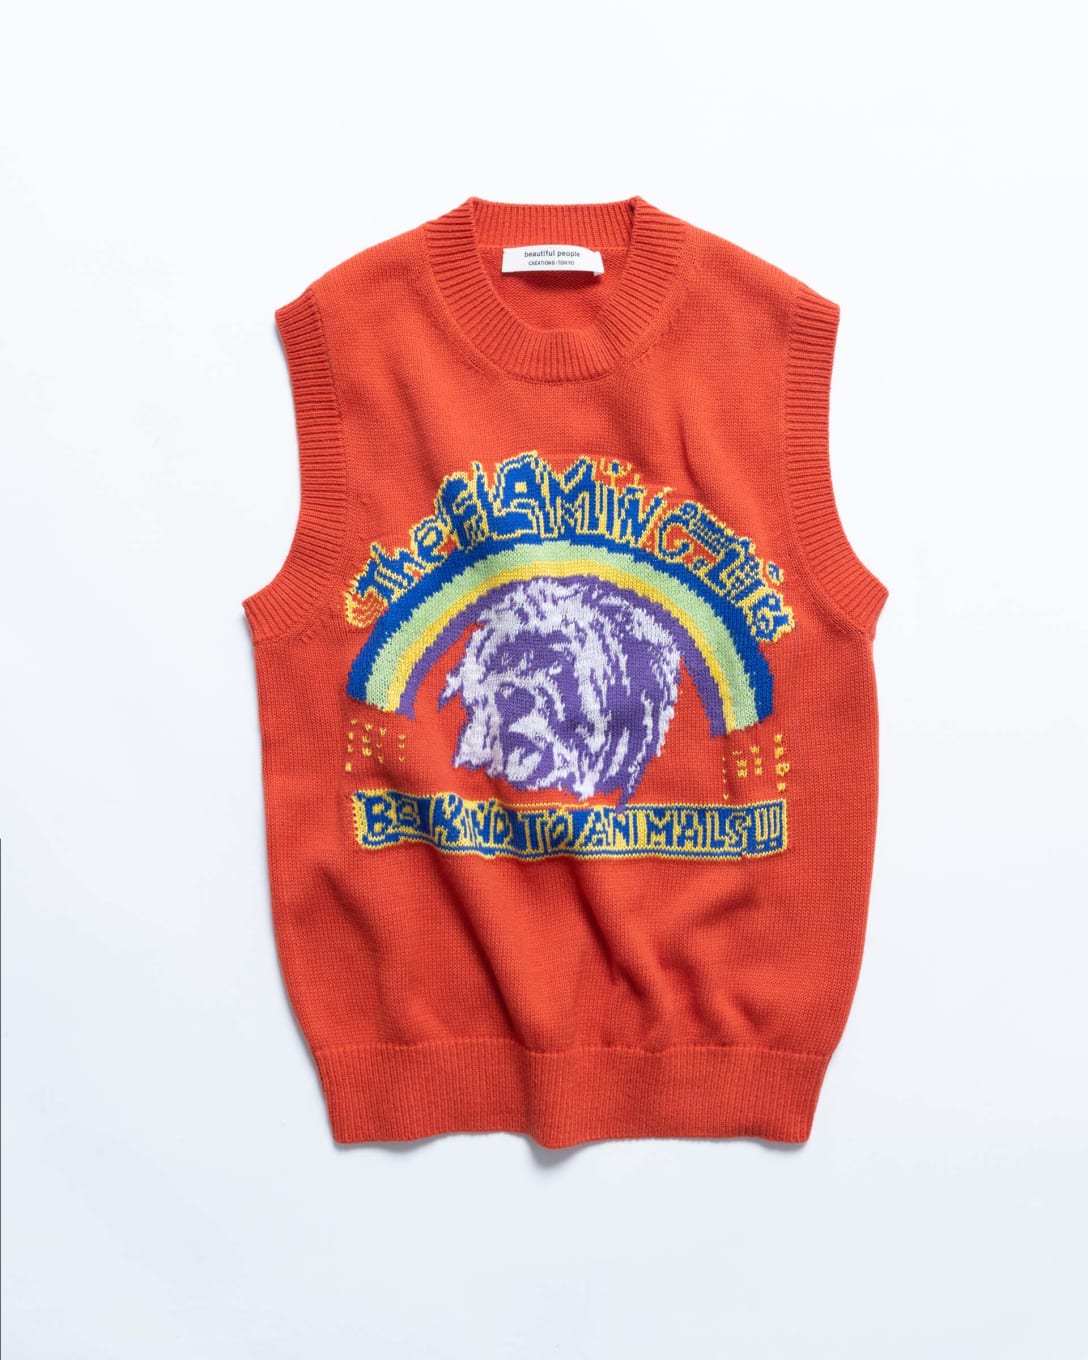 THE/ a ROCK KNIT The Flaming Lips（5万3900円） Image by FASHIONSNAP